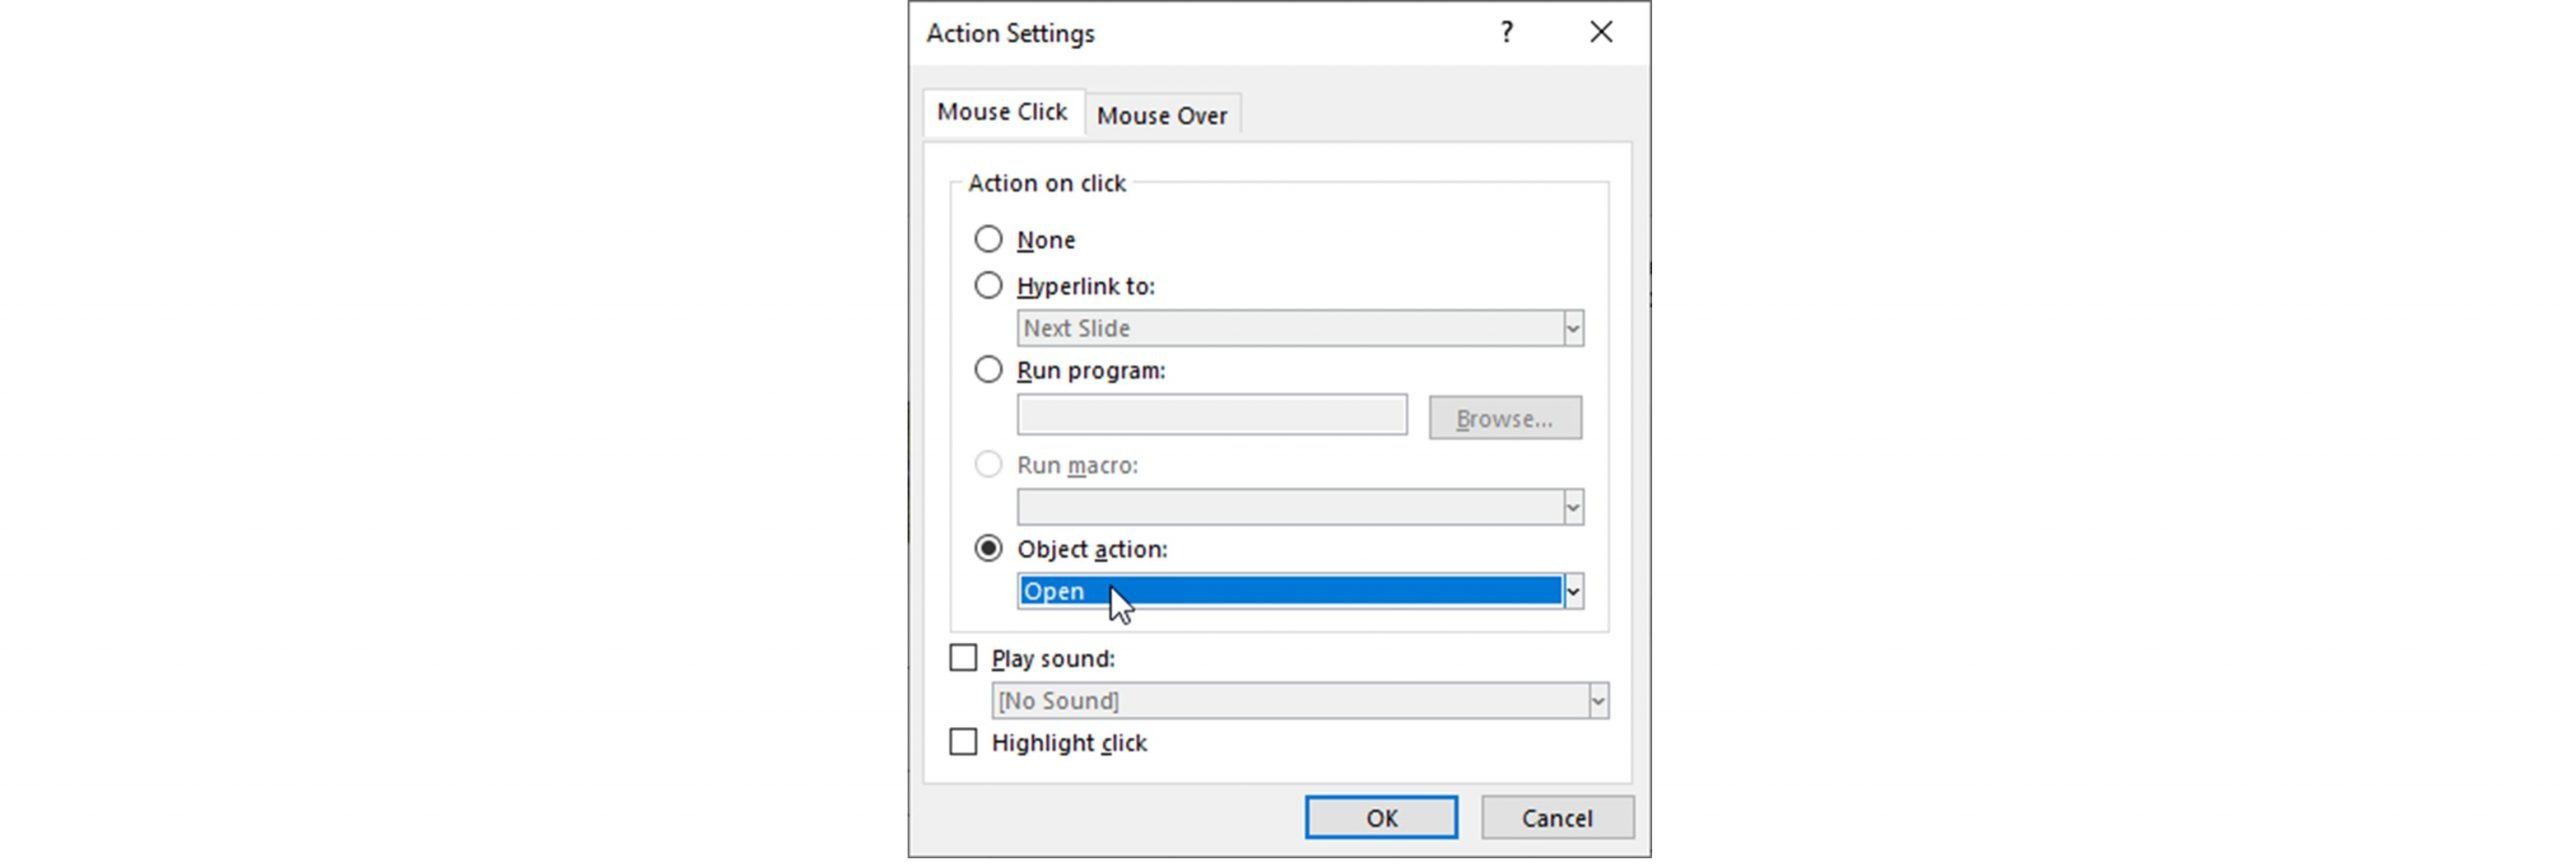 Screenshot of the Action Settings pop up